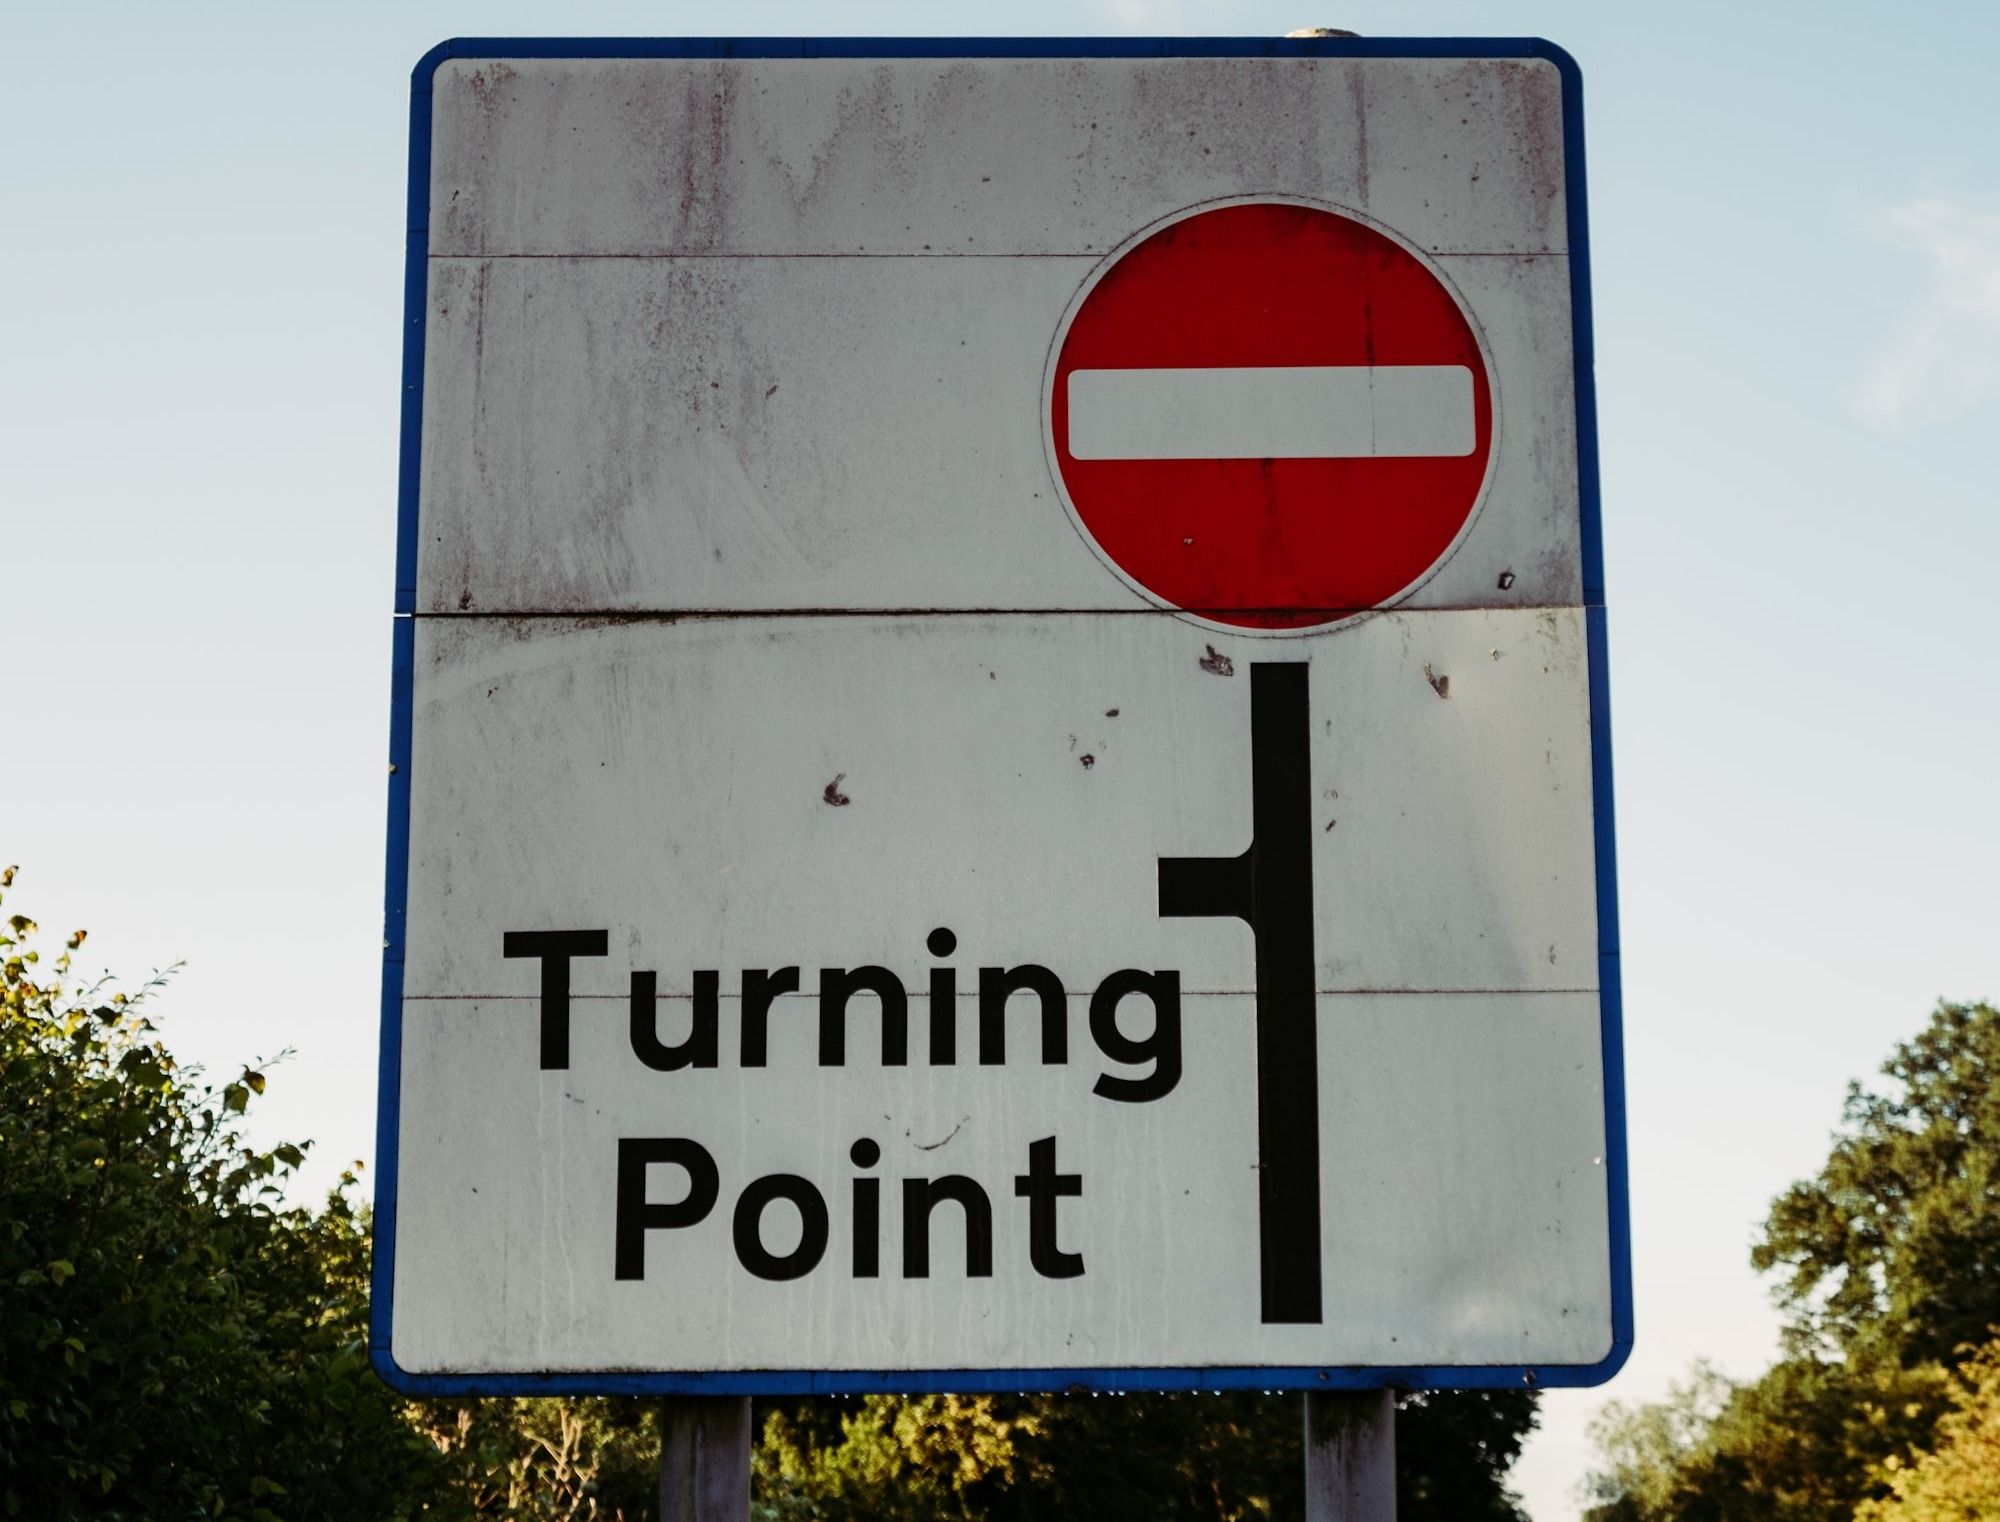 A traffic sign reads "turning point" on a street in the daytime.